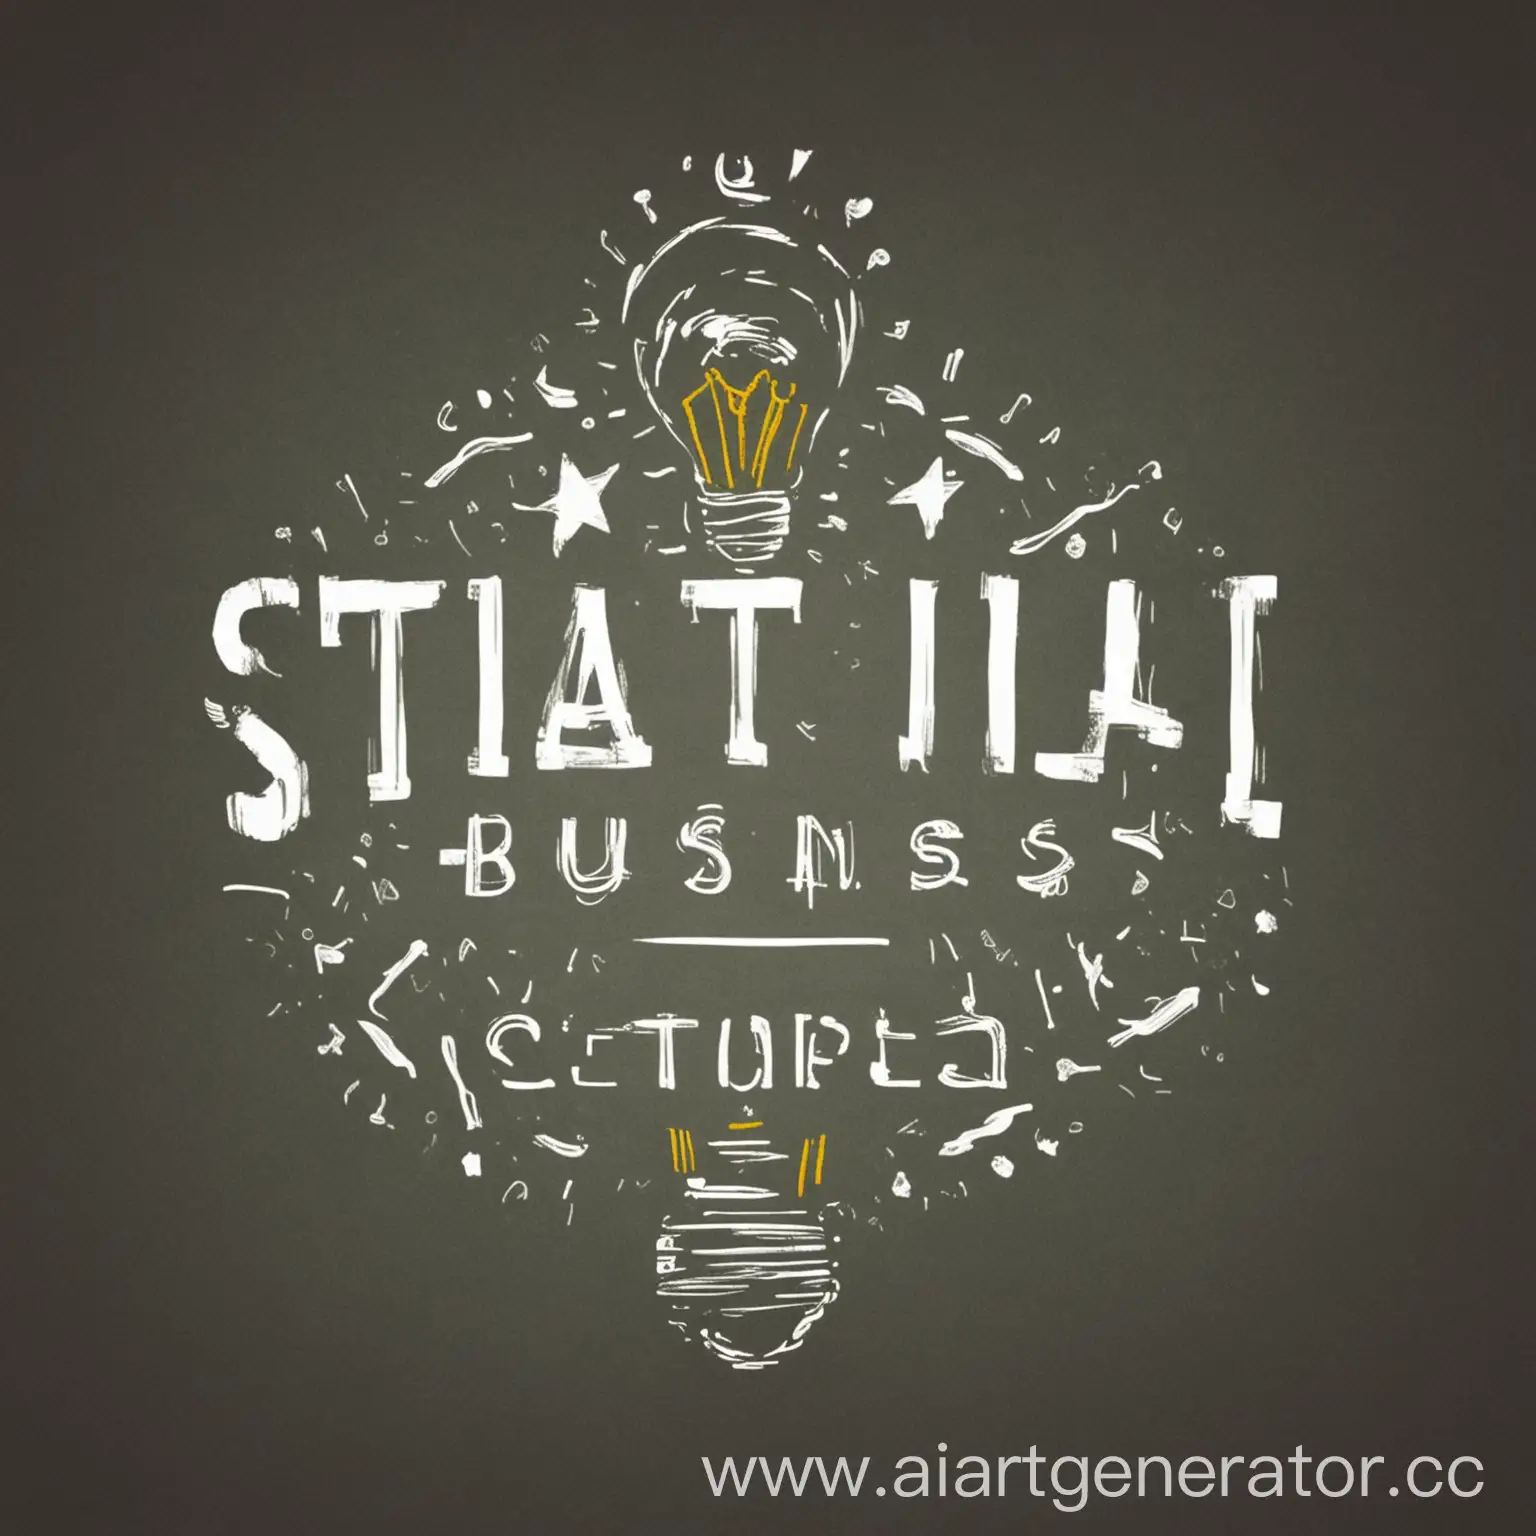 Creative-Business-Ideas-for-StartupLab